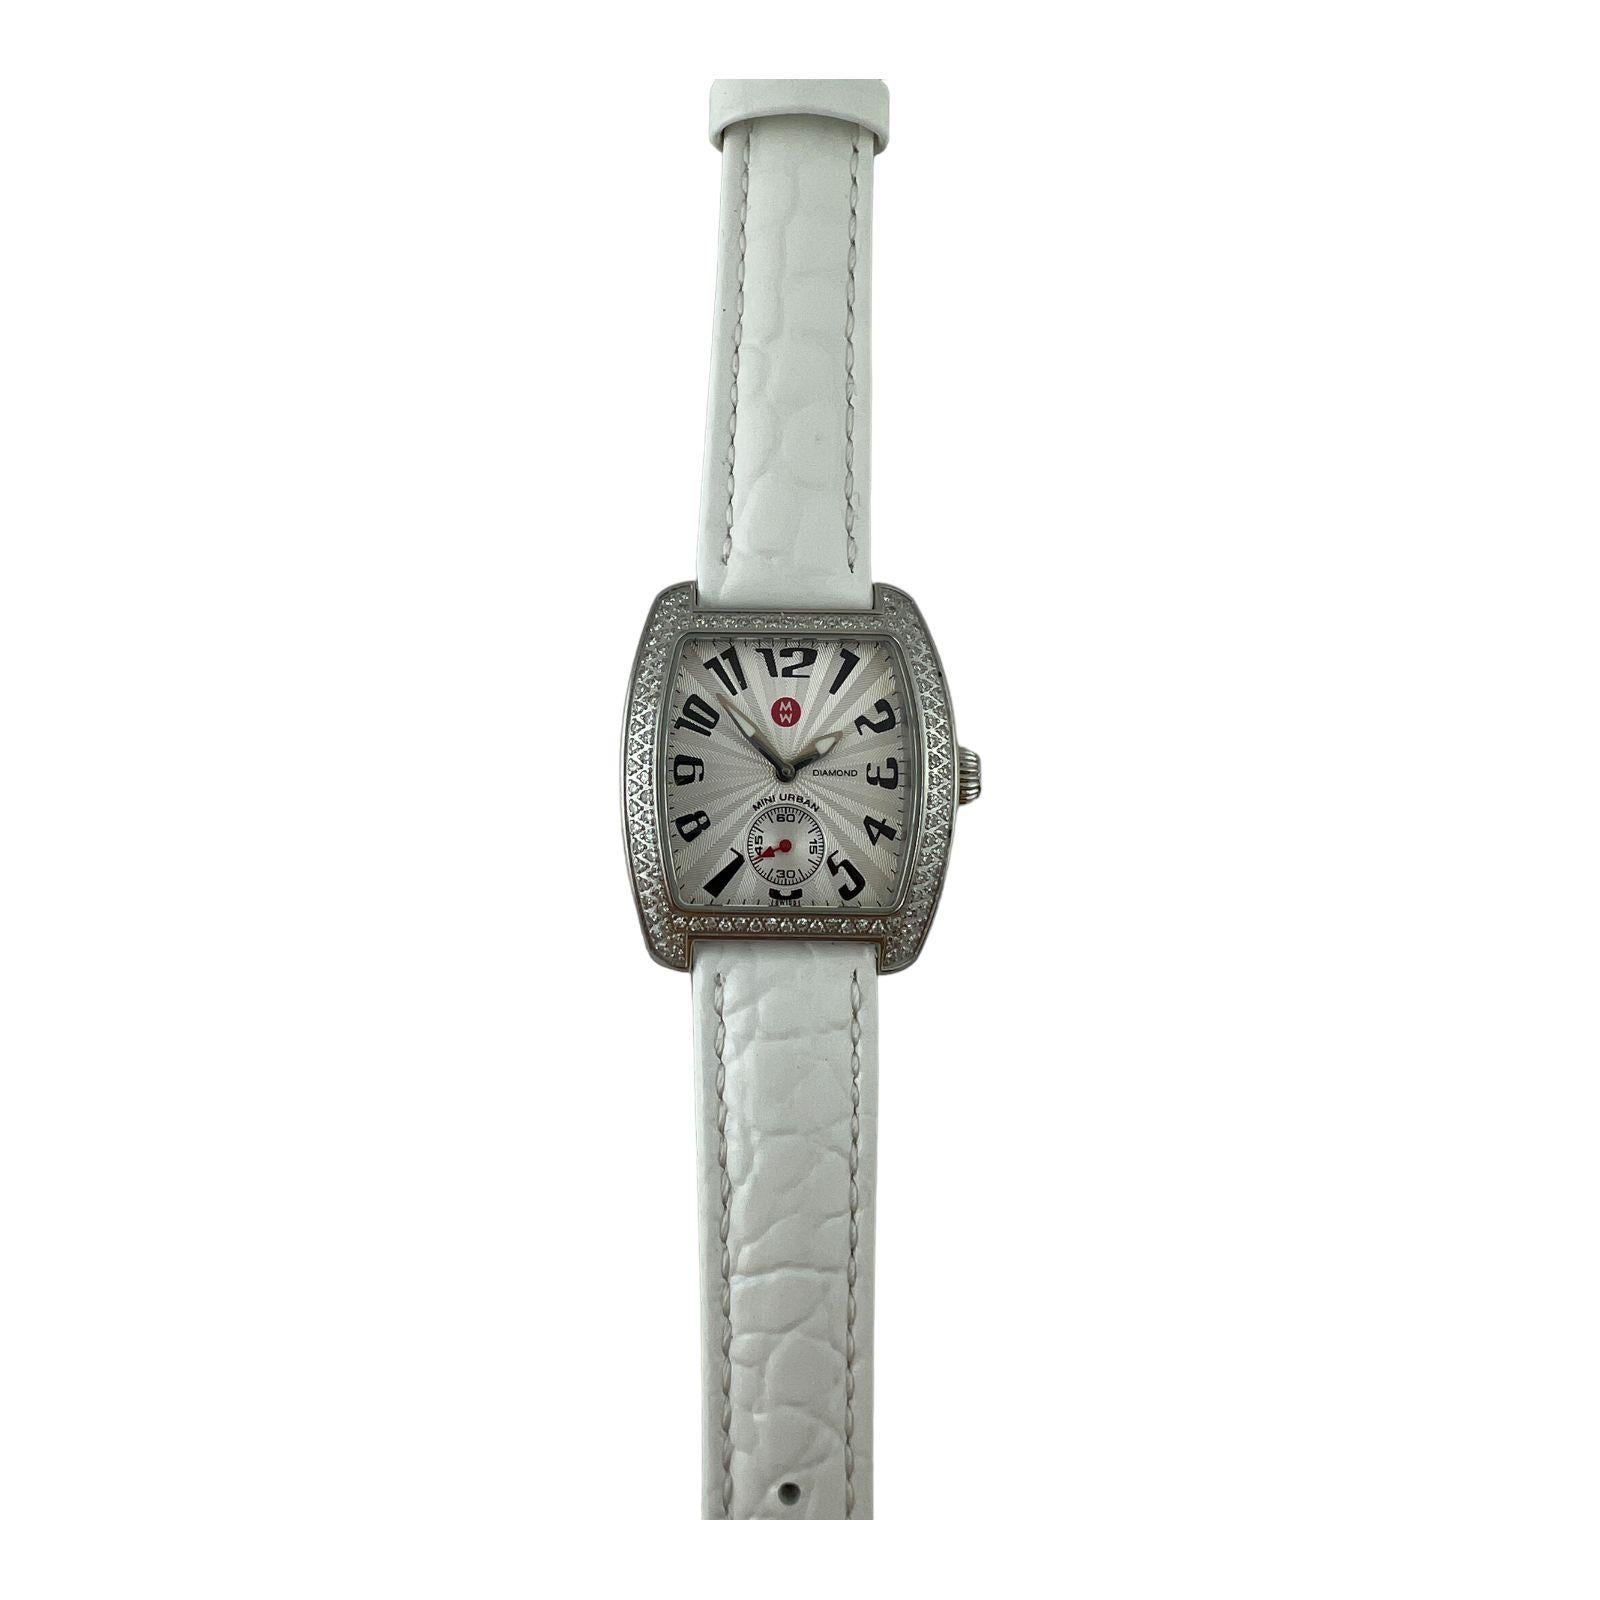 Michele Mini Urban Diamond Ladies Watch

Model: MW02A01A2001
Serial: N26803SS

This diamond Michele watch is set in stainless steel with a diamond bezel and white leather band

This watch is approx. 8.25